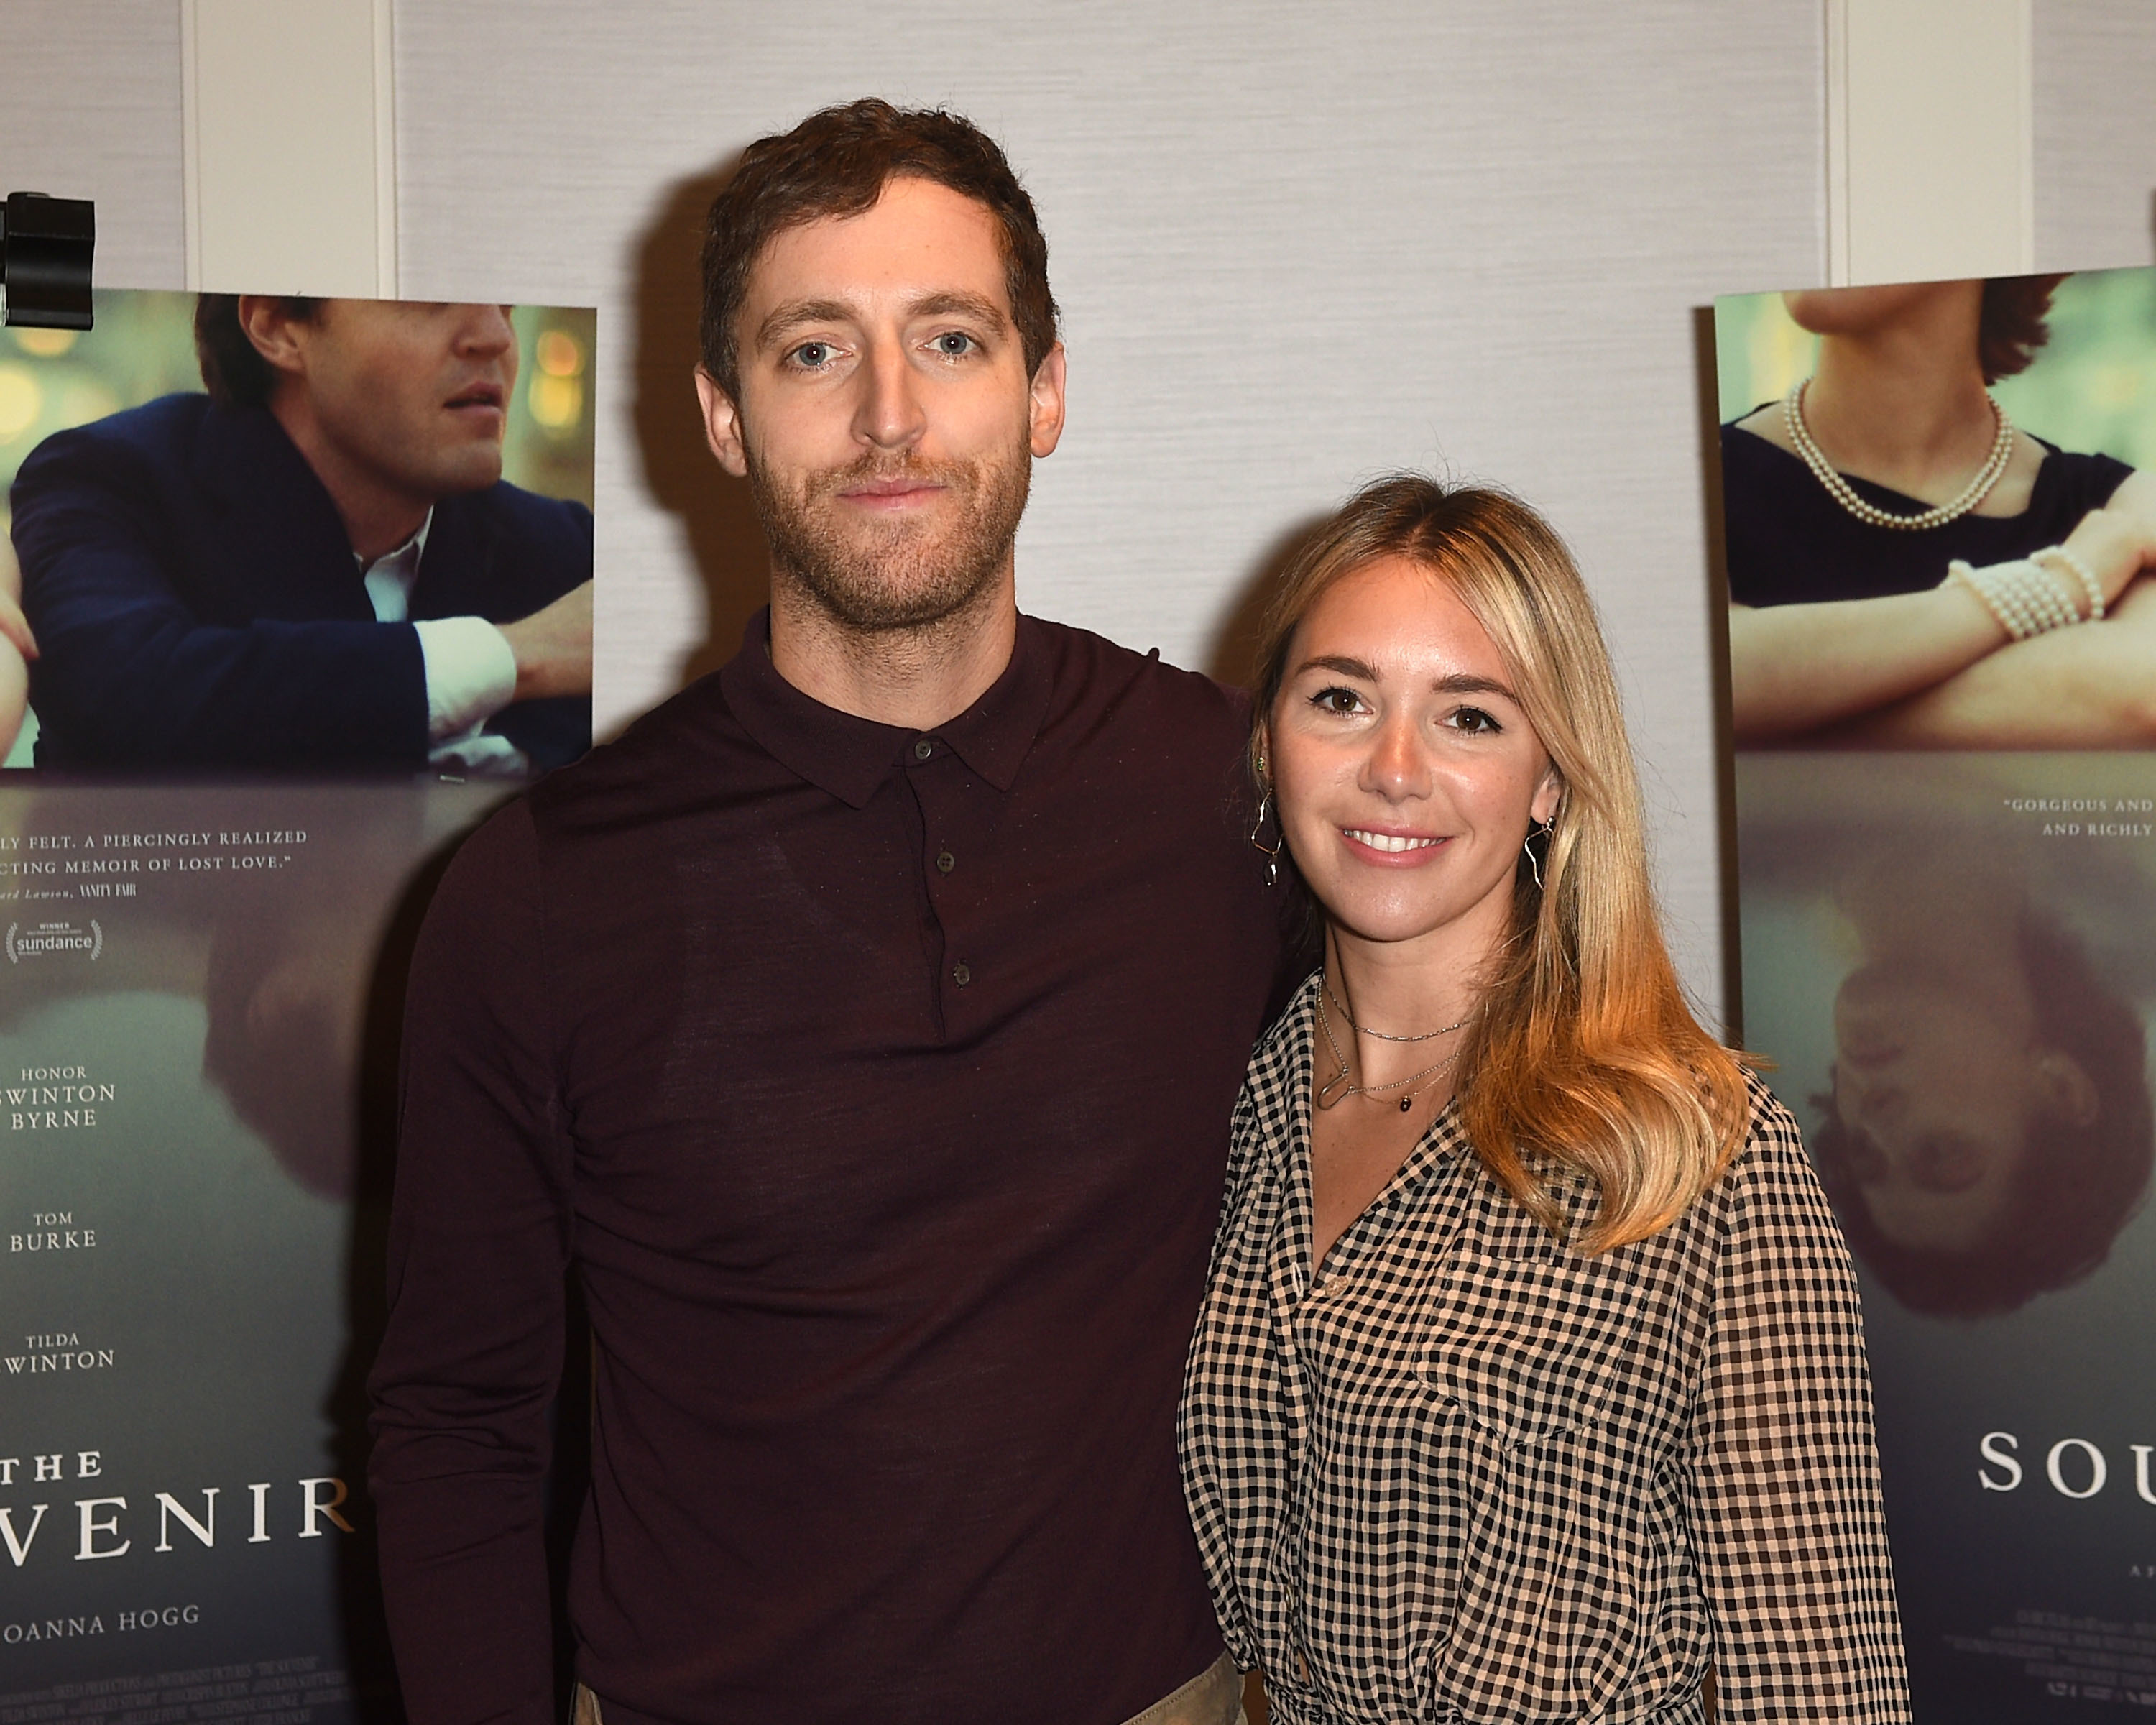 Silicon Valleys Thomas Middleditch says he and wife are swingers Wonderwall picture